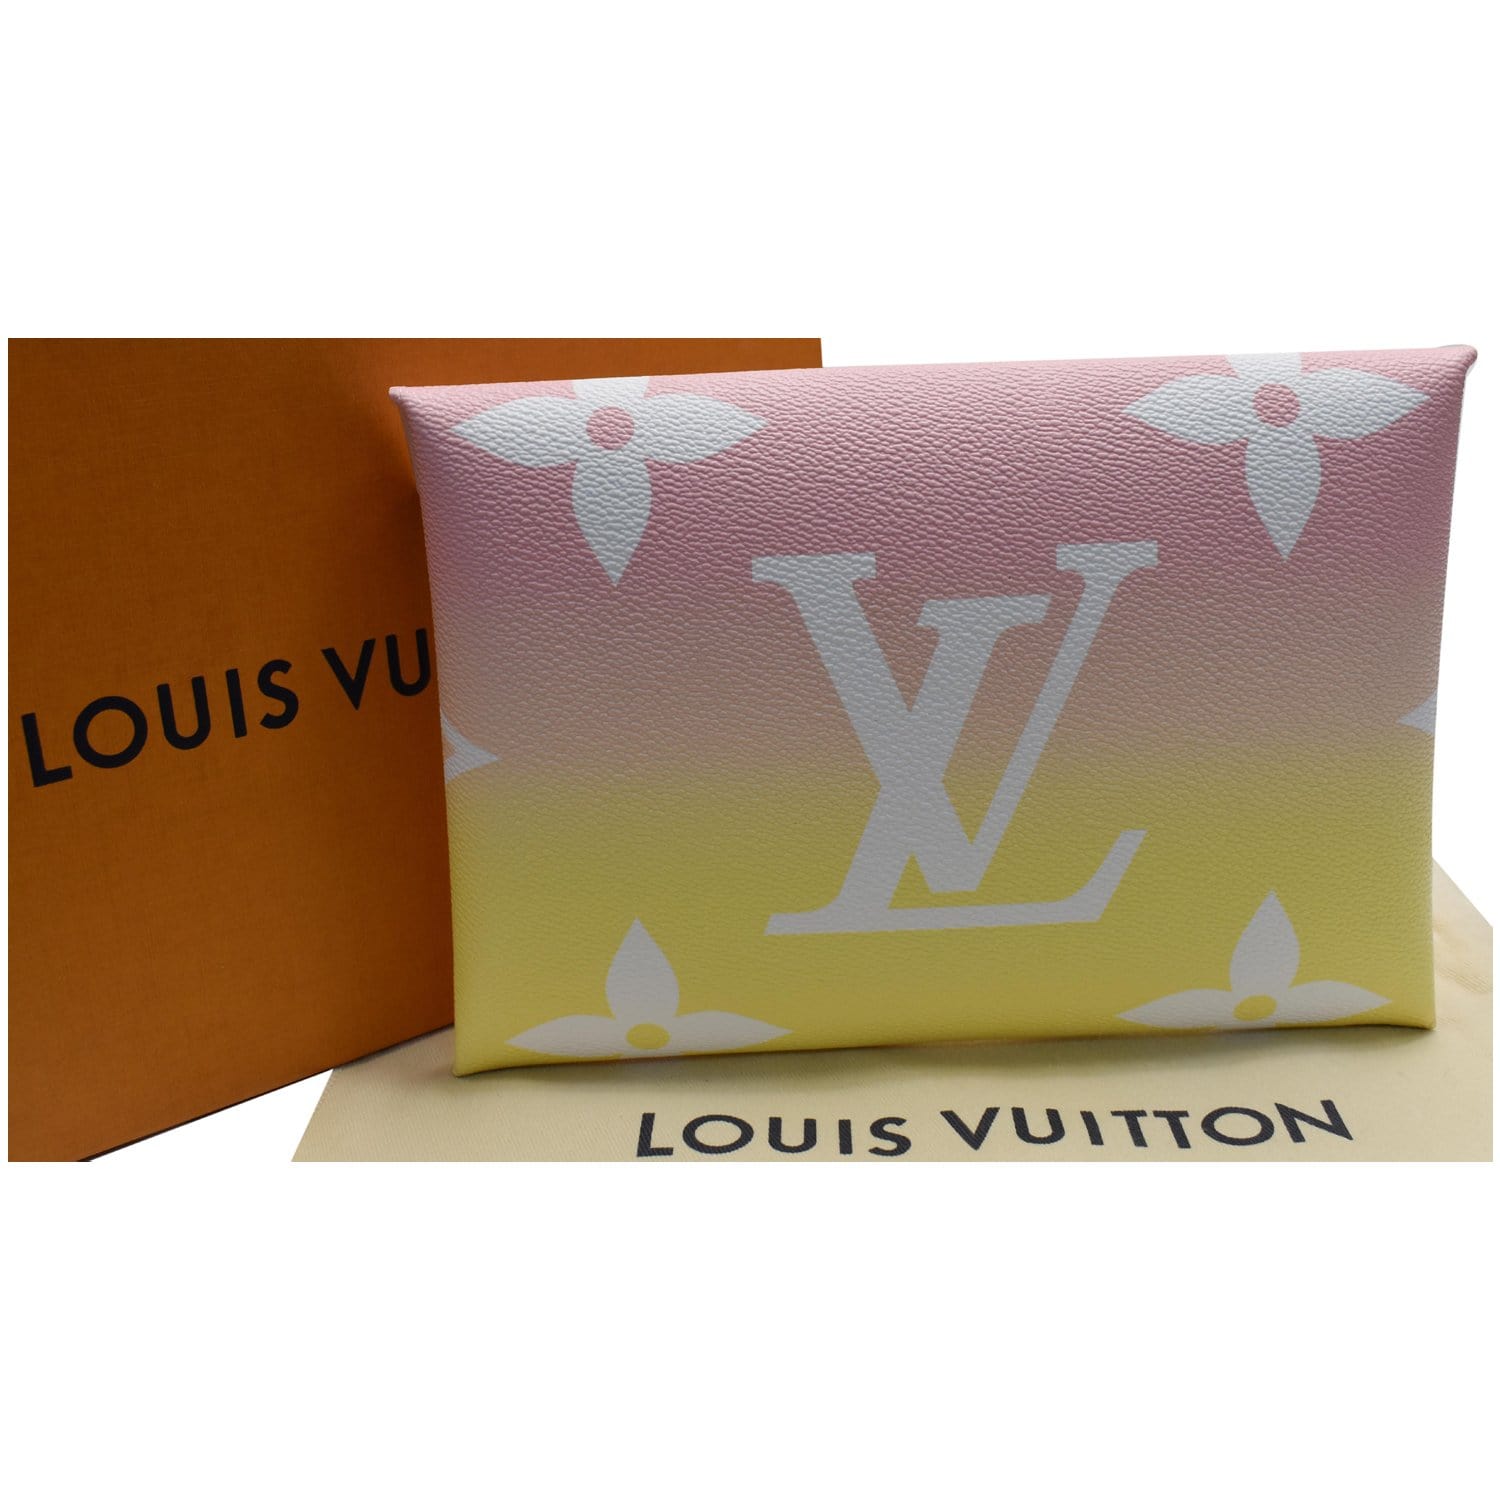 Louis Vuitton Monogram Giant by The Pool Large Kirigami Pochette Pink